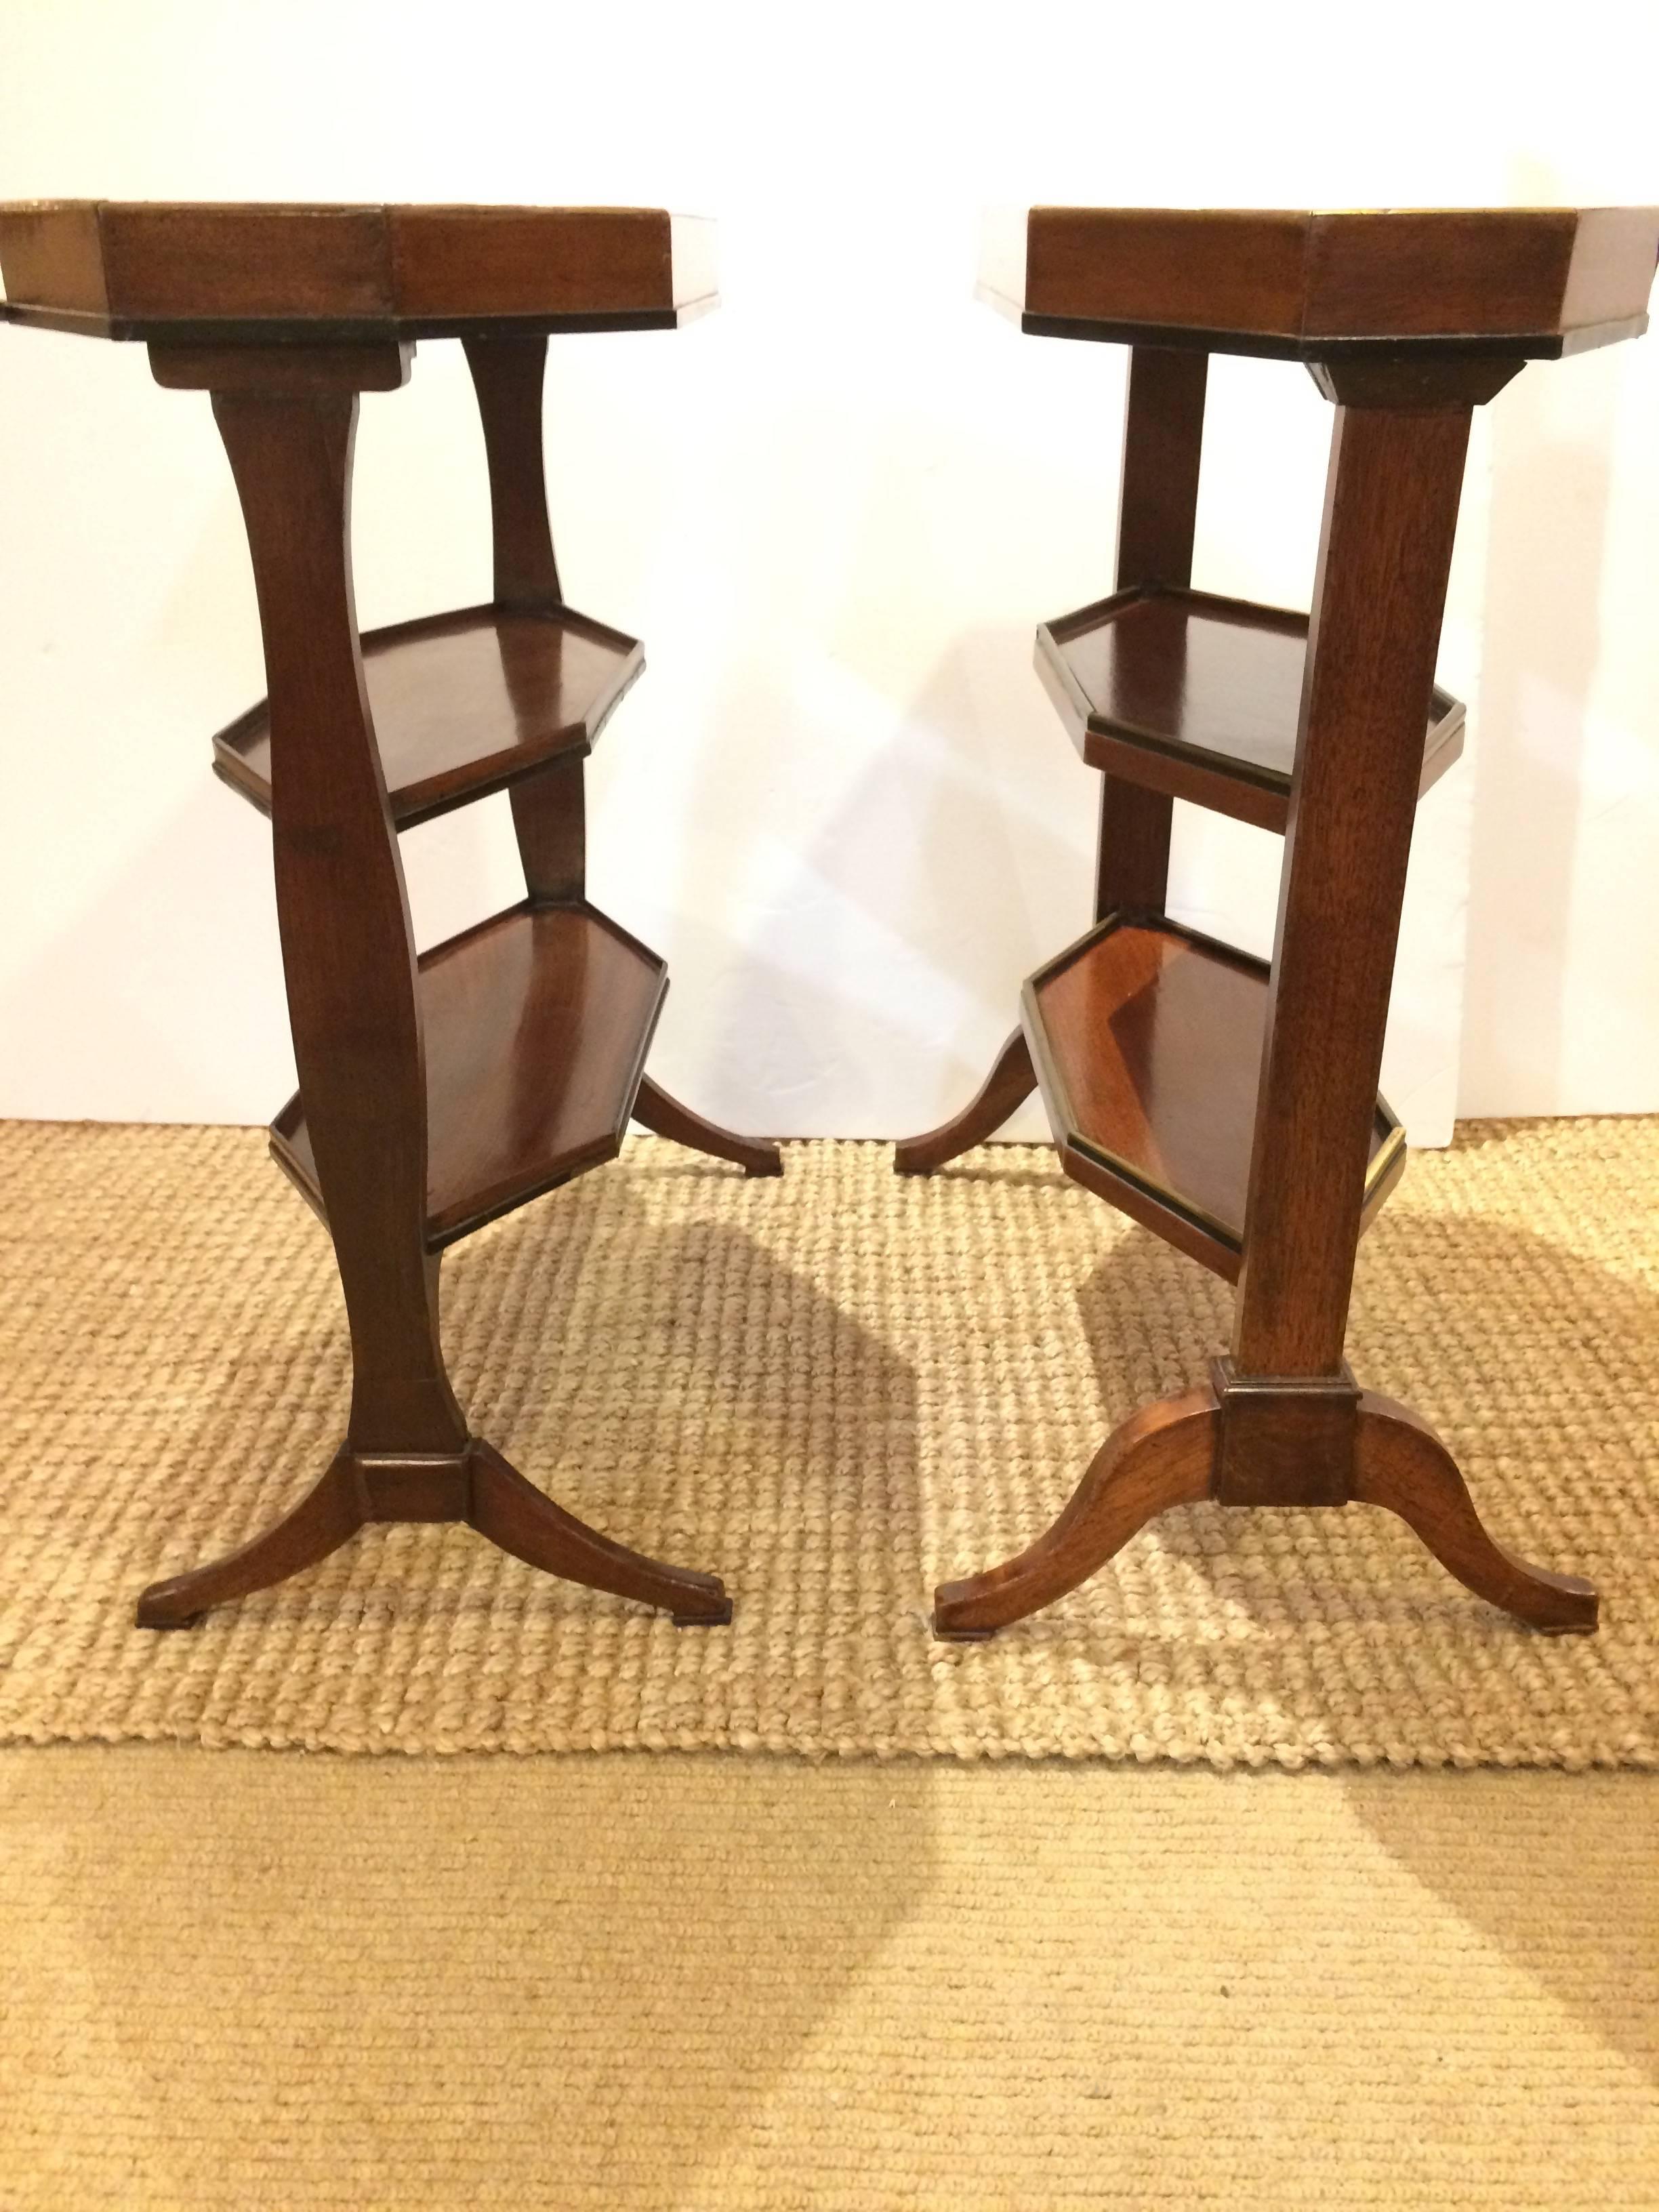 Rare and valuable pair of three-tier mahogany octagonal shaped etagere style tricoteuses. Adding to their interest is that they are not an exact match, with subtle differences in the shape of the sides and feet. One side table has brass and ebony